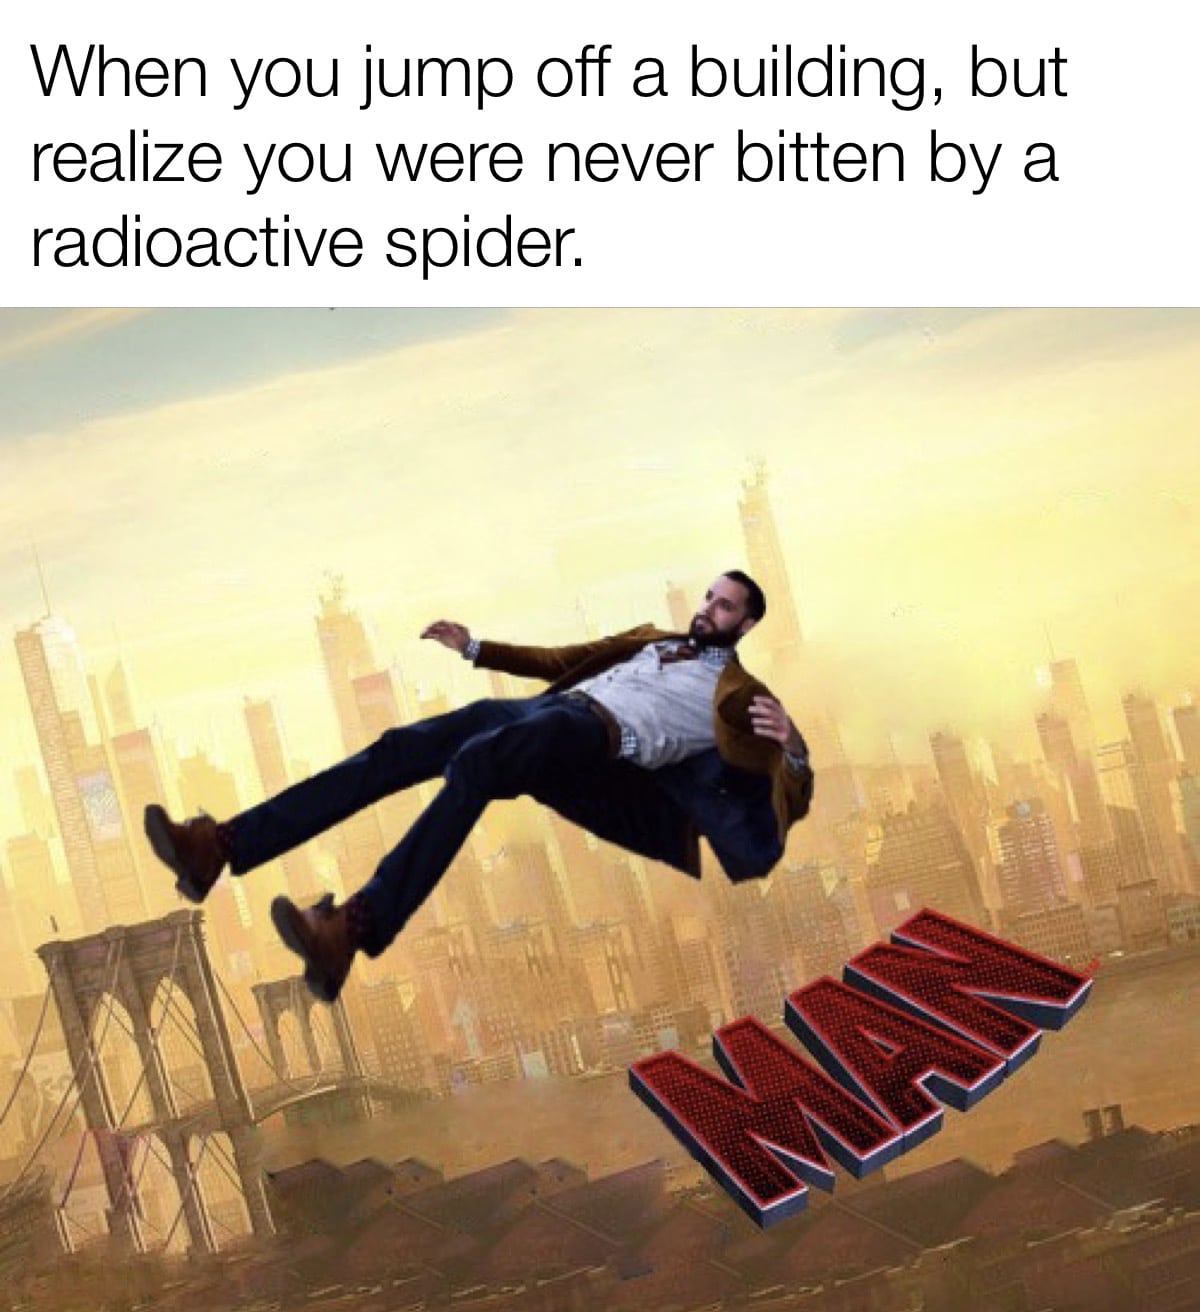 Funny, No, Person, THOT, SPIDER, SHE BREATHES SHE other memes Funny, No, Person, THOT, SPIDER, SHE BREATHES SHE text: When you jump off a building, but realize you were never bitten by a radioactive spider. 